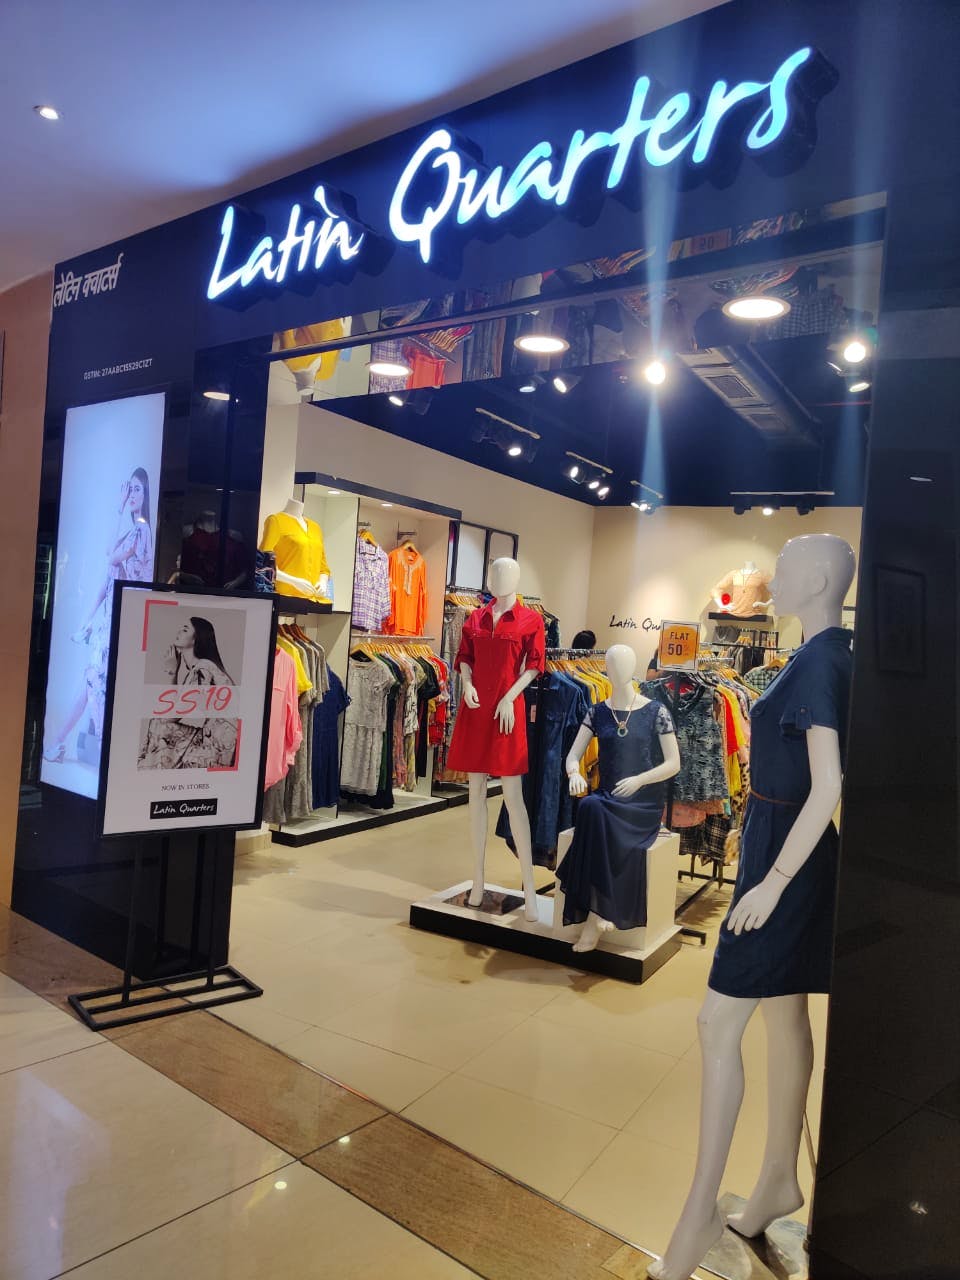 Outlet store,Boutique,Retail,Display window,Building,Shopping mall,Footwear,Shopping,Trade,Brand